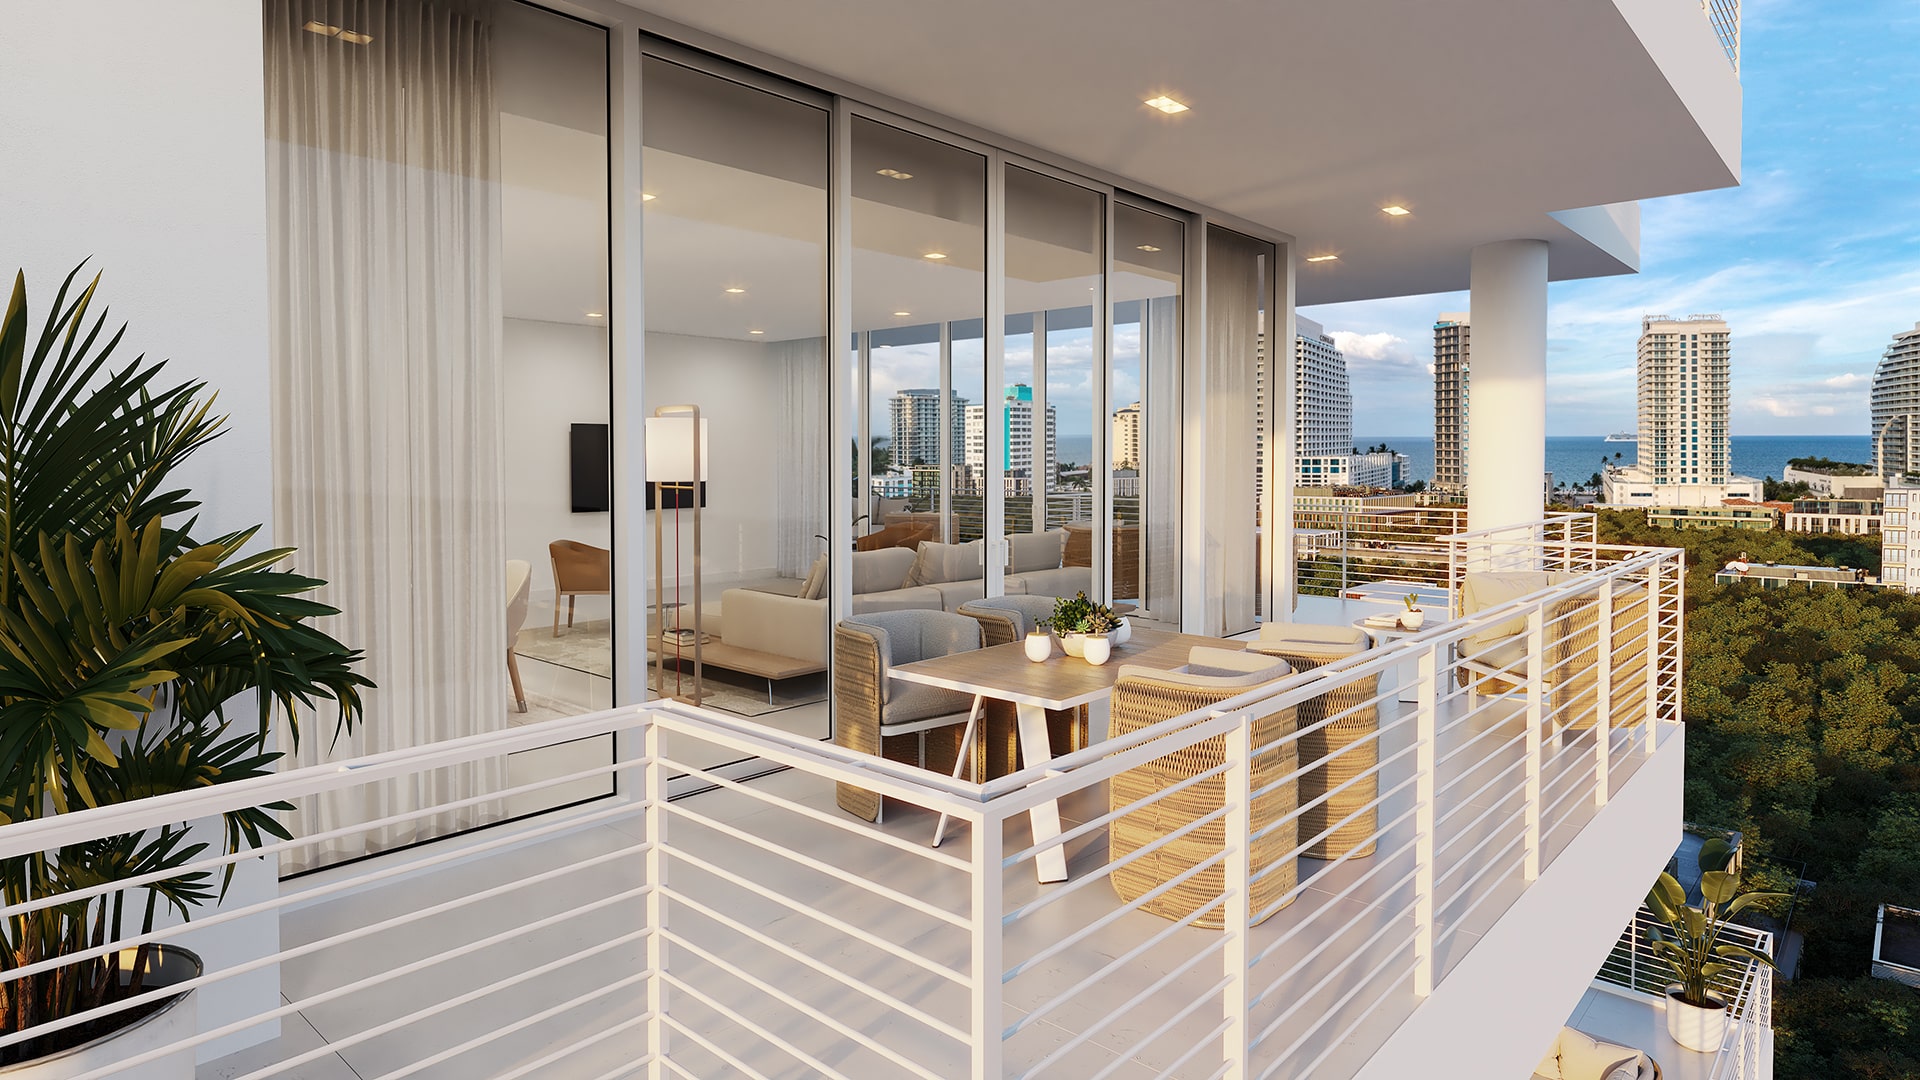 Residence terrace showcases blue skies and beautiful views.